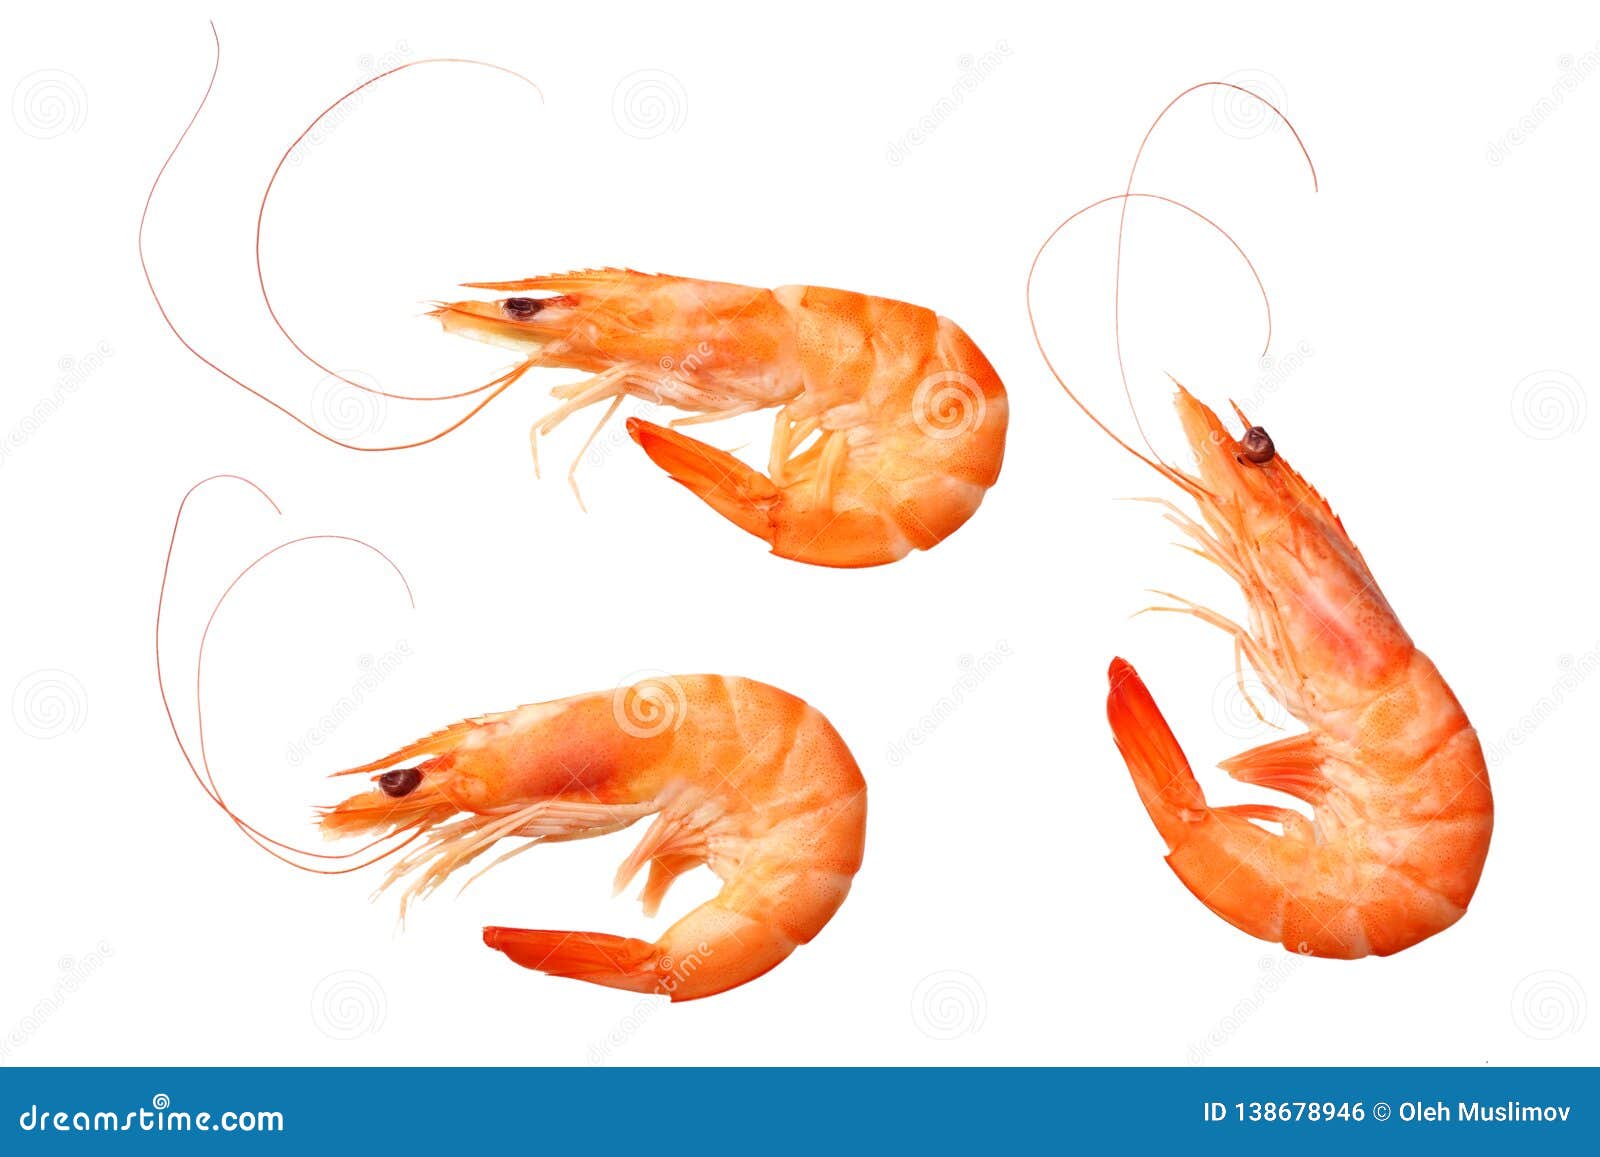 Shrimps Isolated on a White Background. Top View Stock Photo - Image of ...